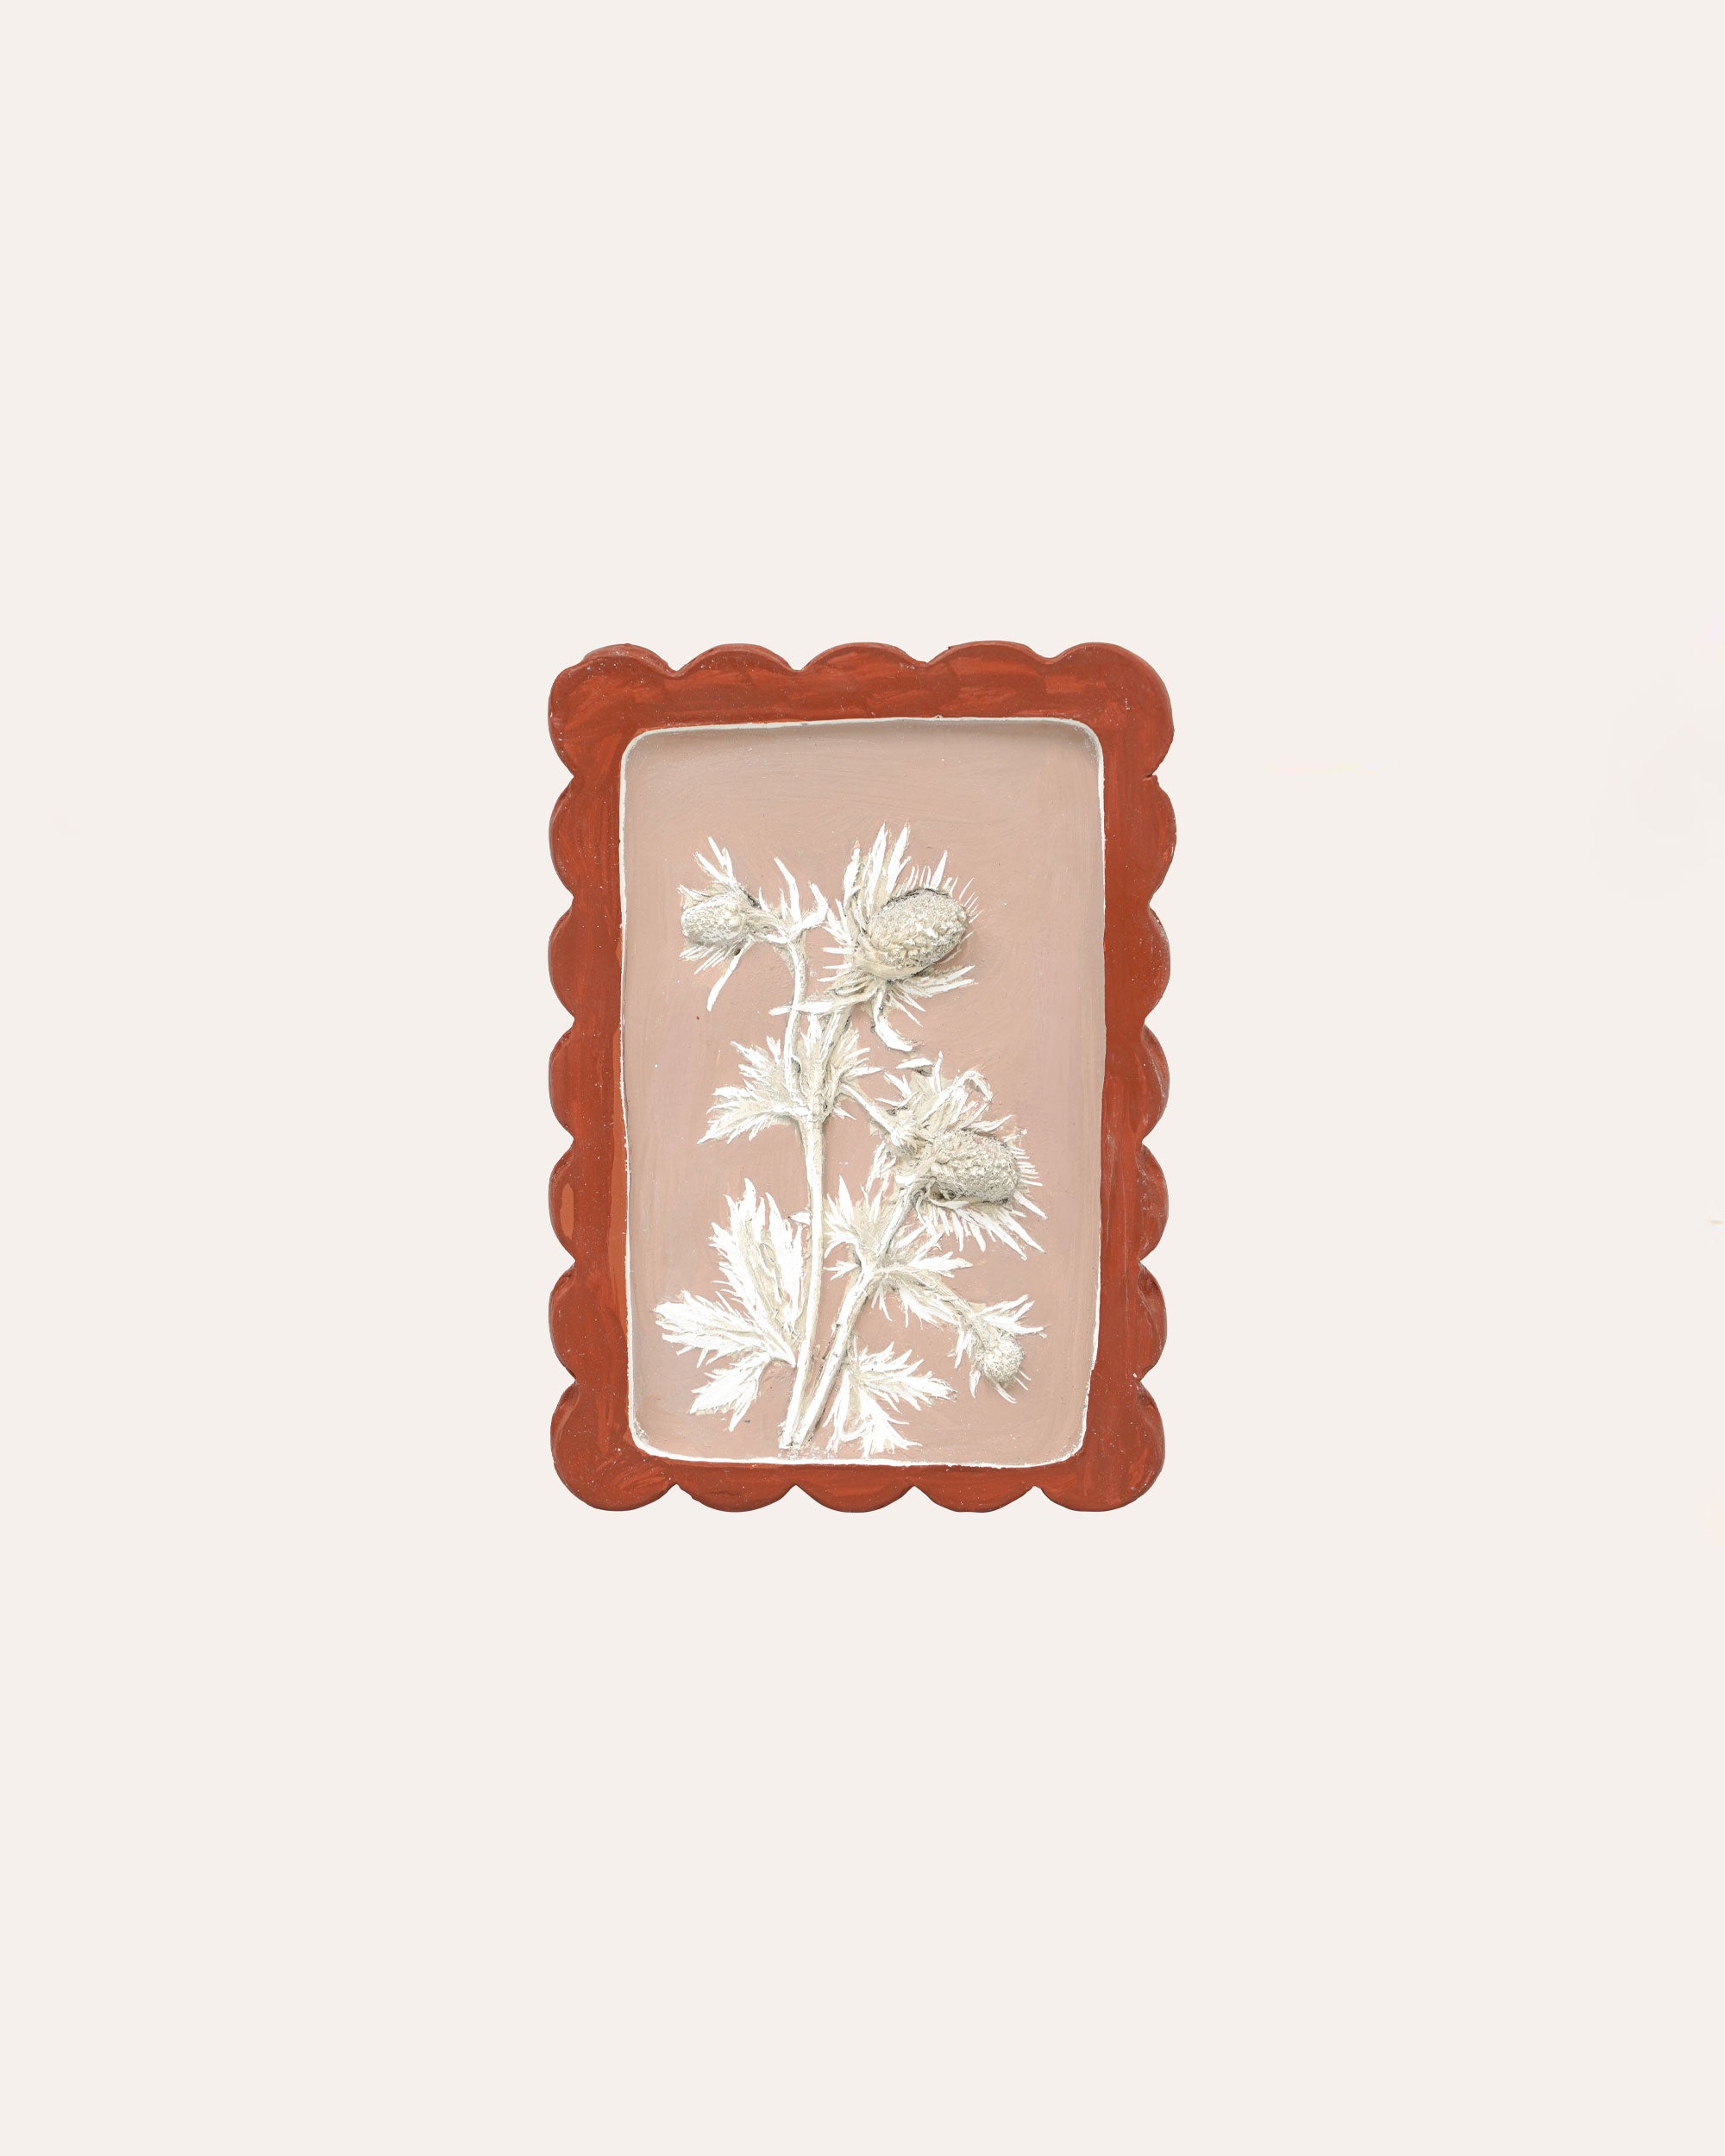 Imprint Casts - Scalloped Botanical Postage stamp - Sea Holly